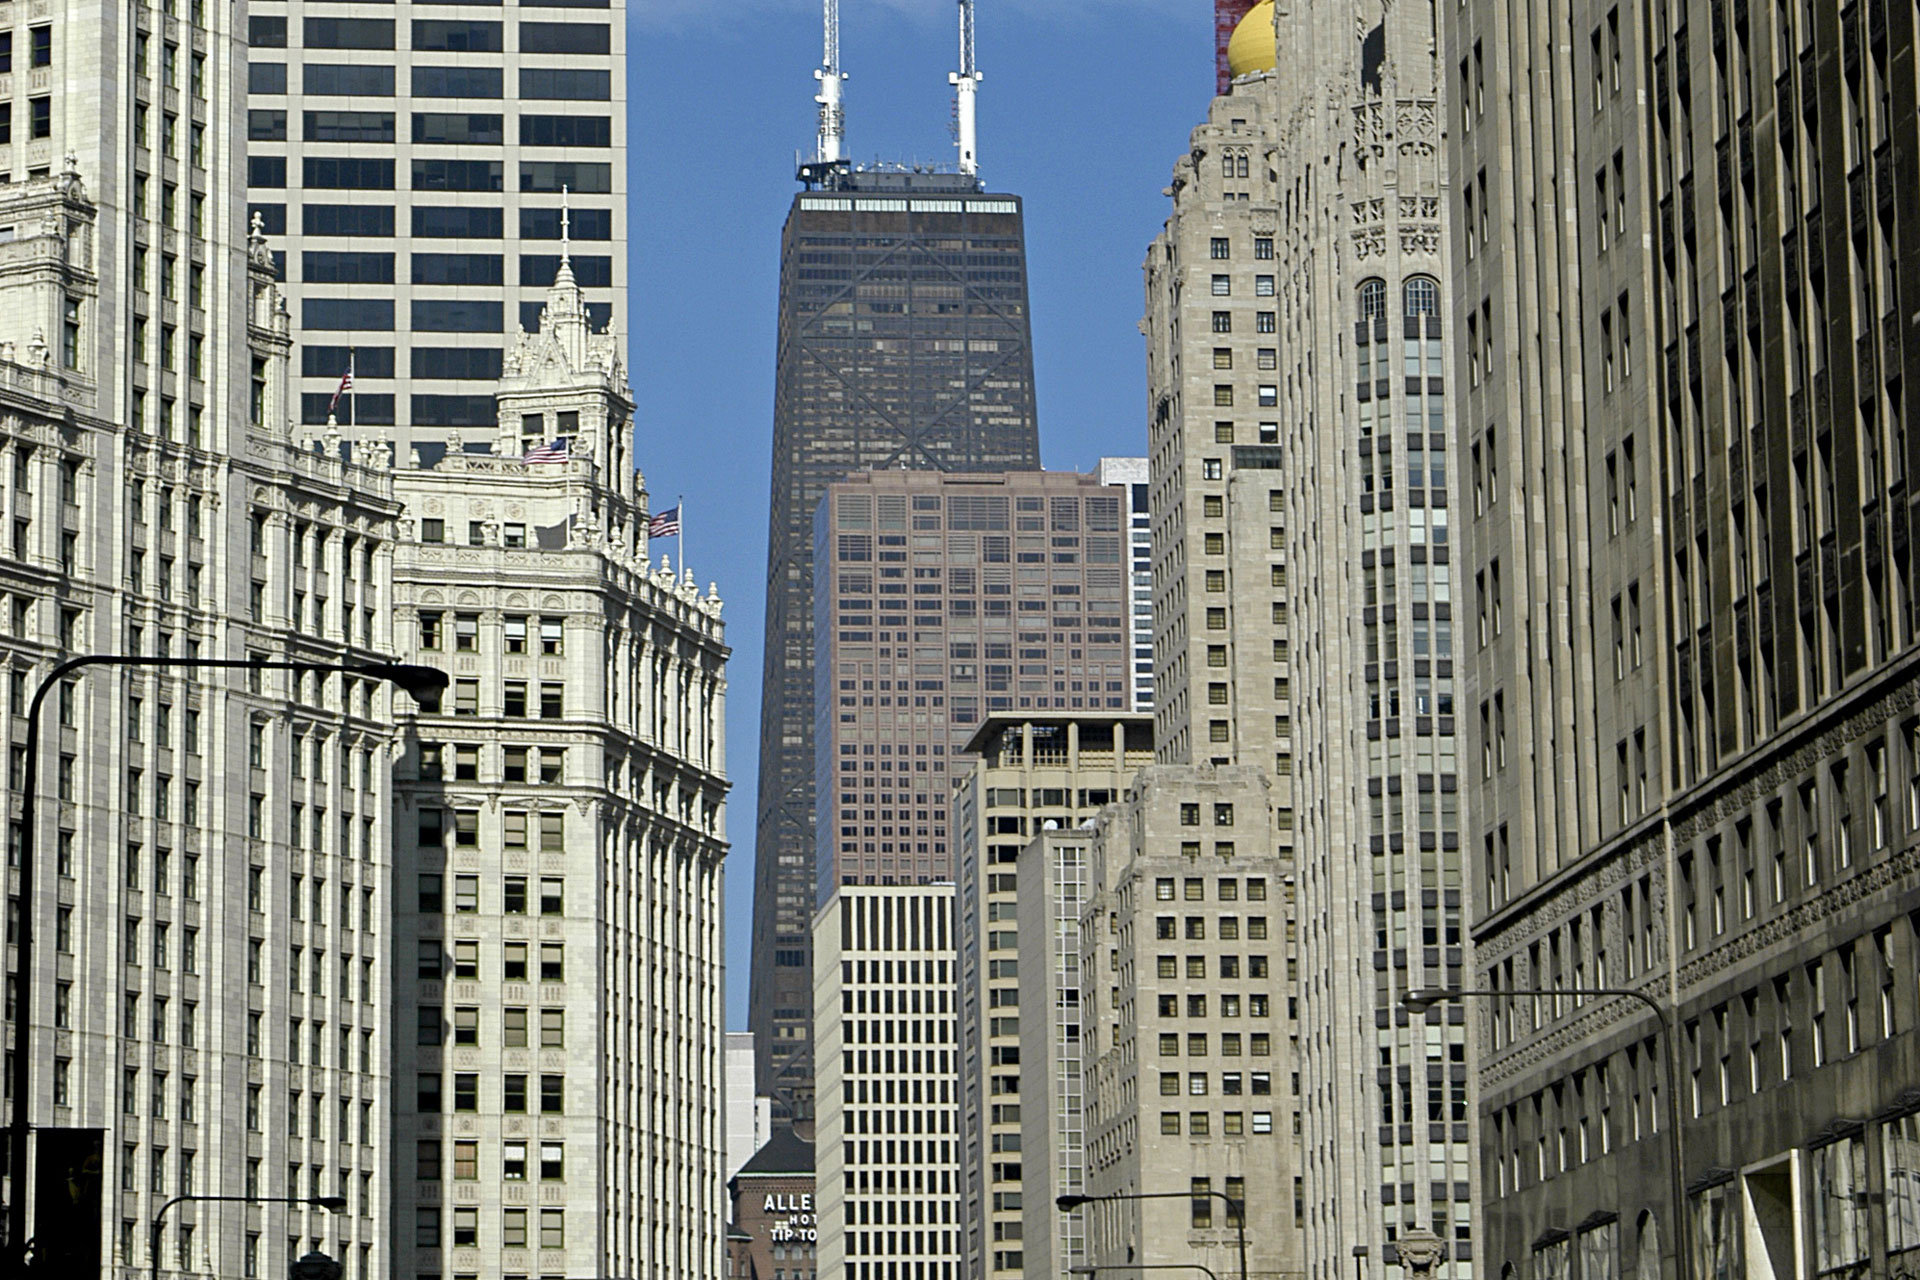 Hancock Building and Michigan Ave